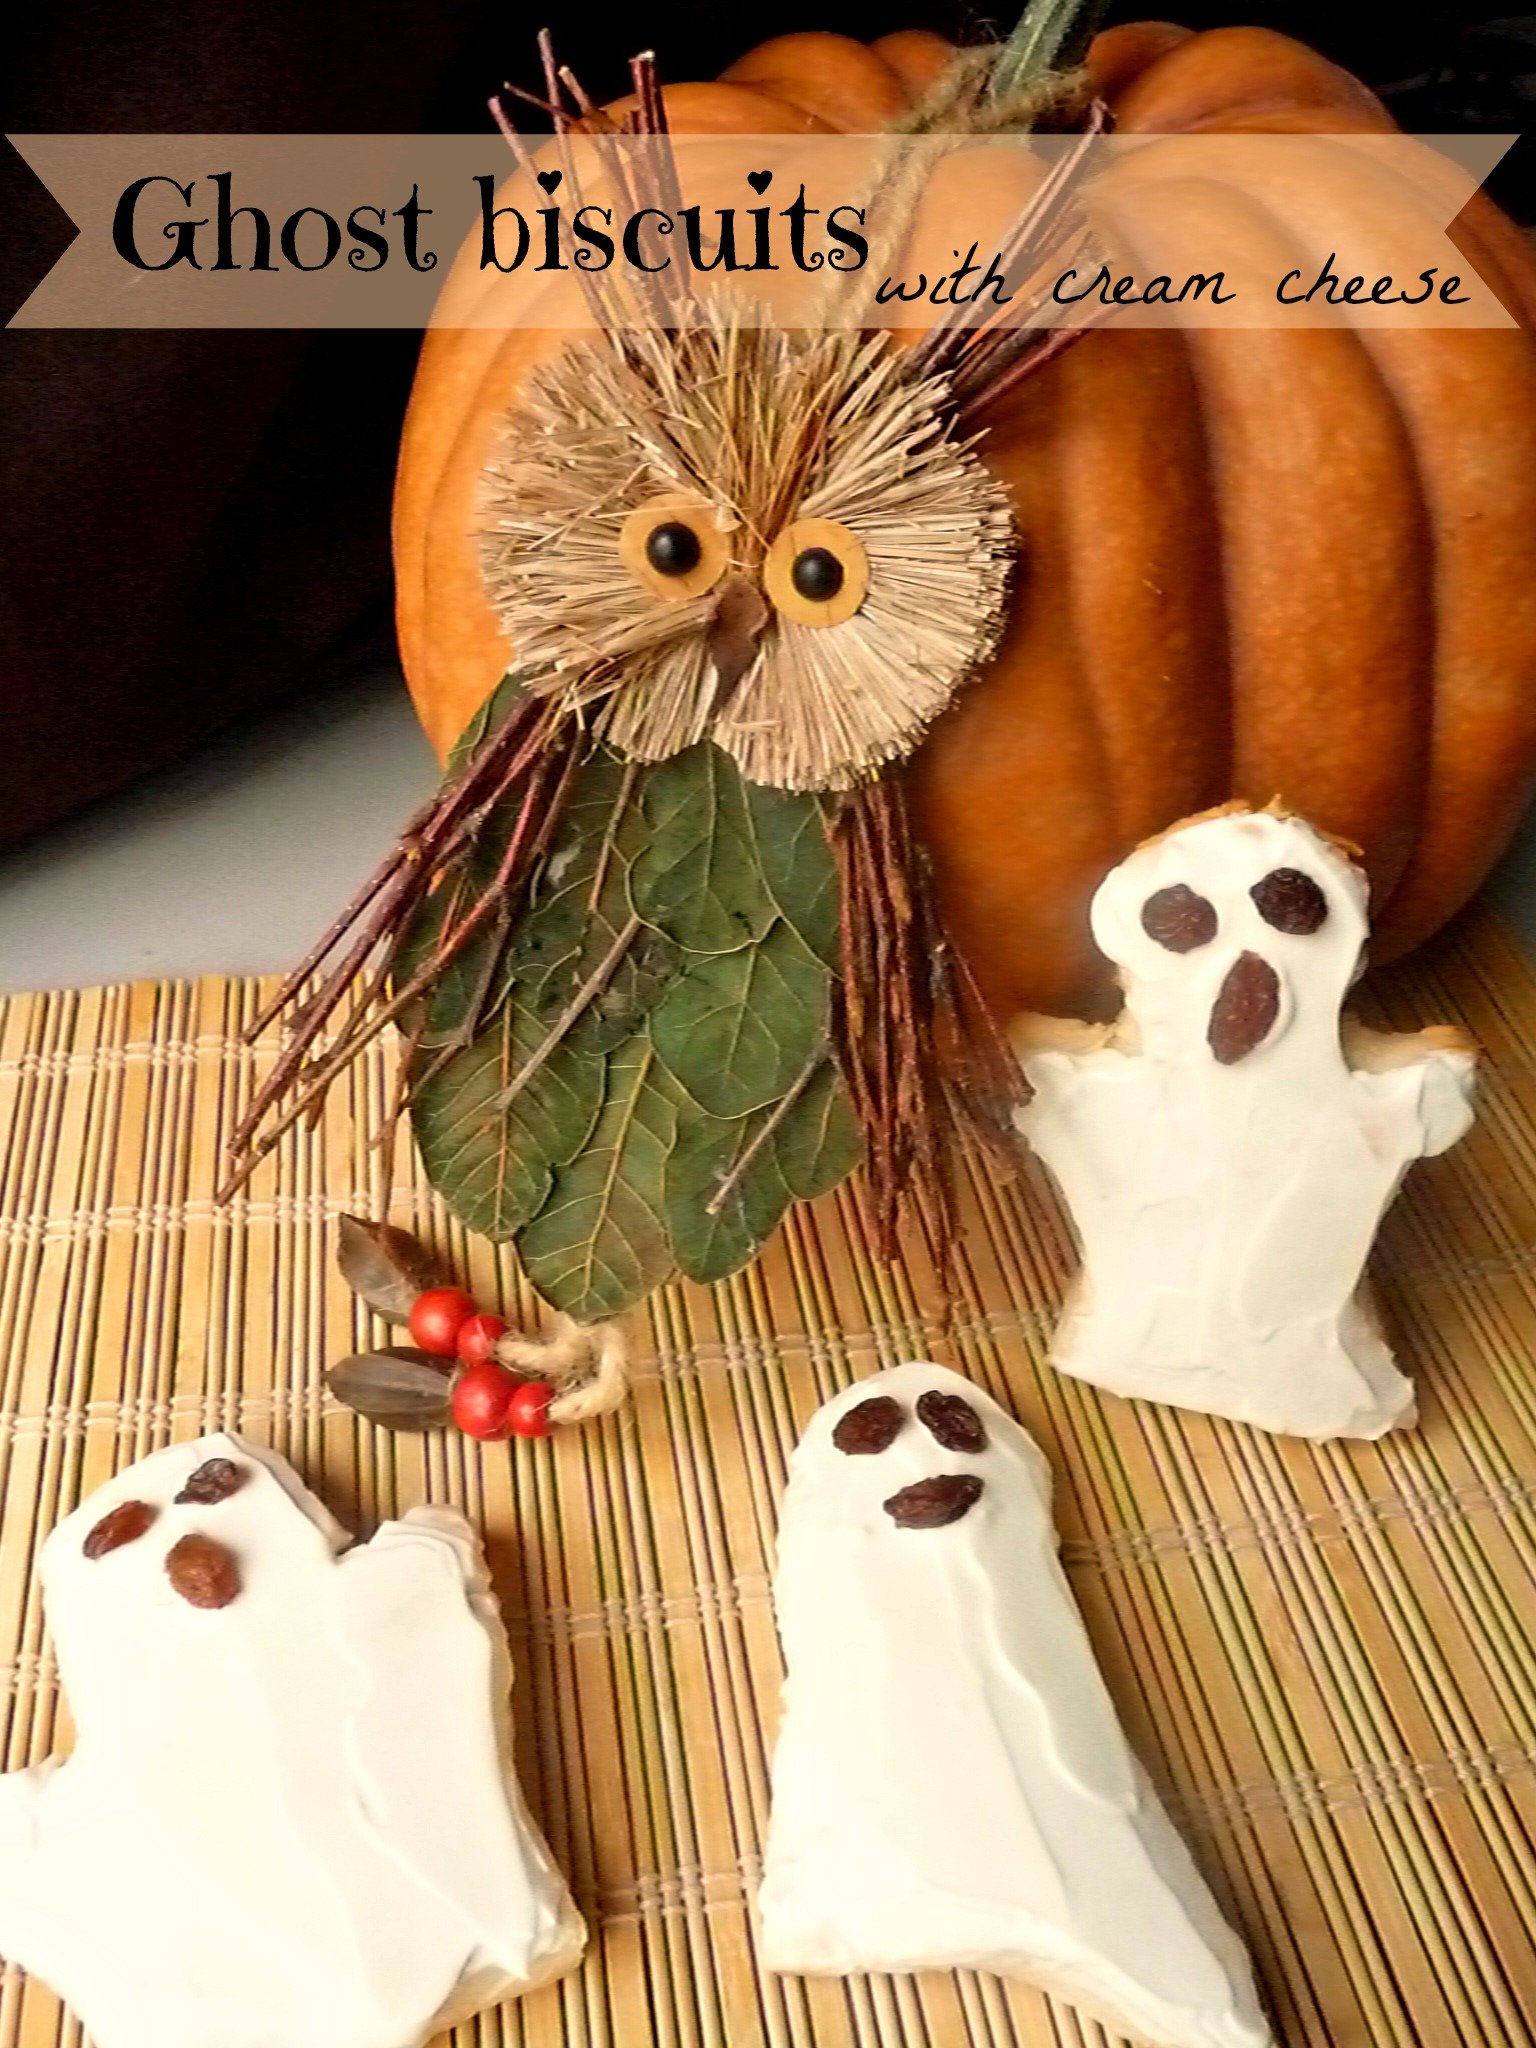 Ghost biscuits with cream cheese 